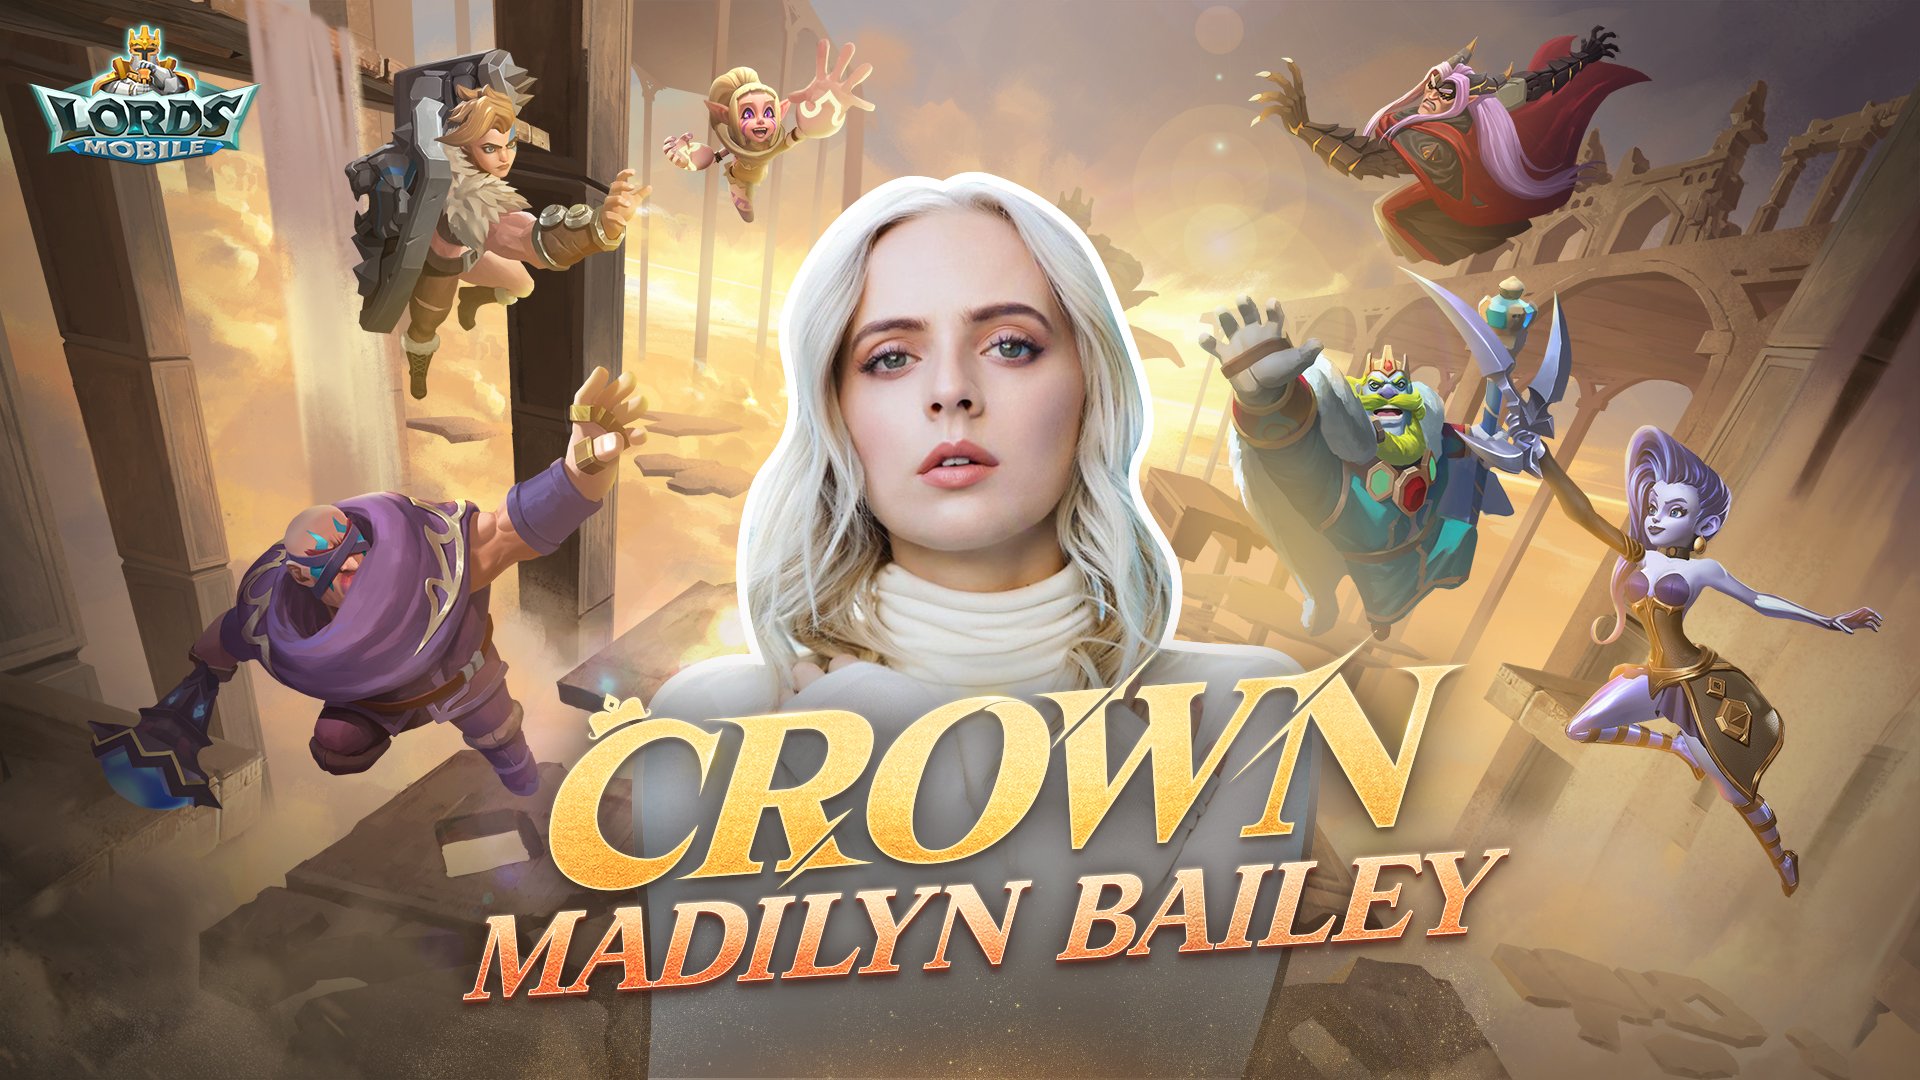 Lords Mobile Has A New Theme Song Courtesy Of YouTuber Music Star Madilyn Bailey thumbnail